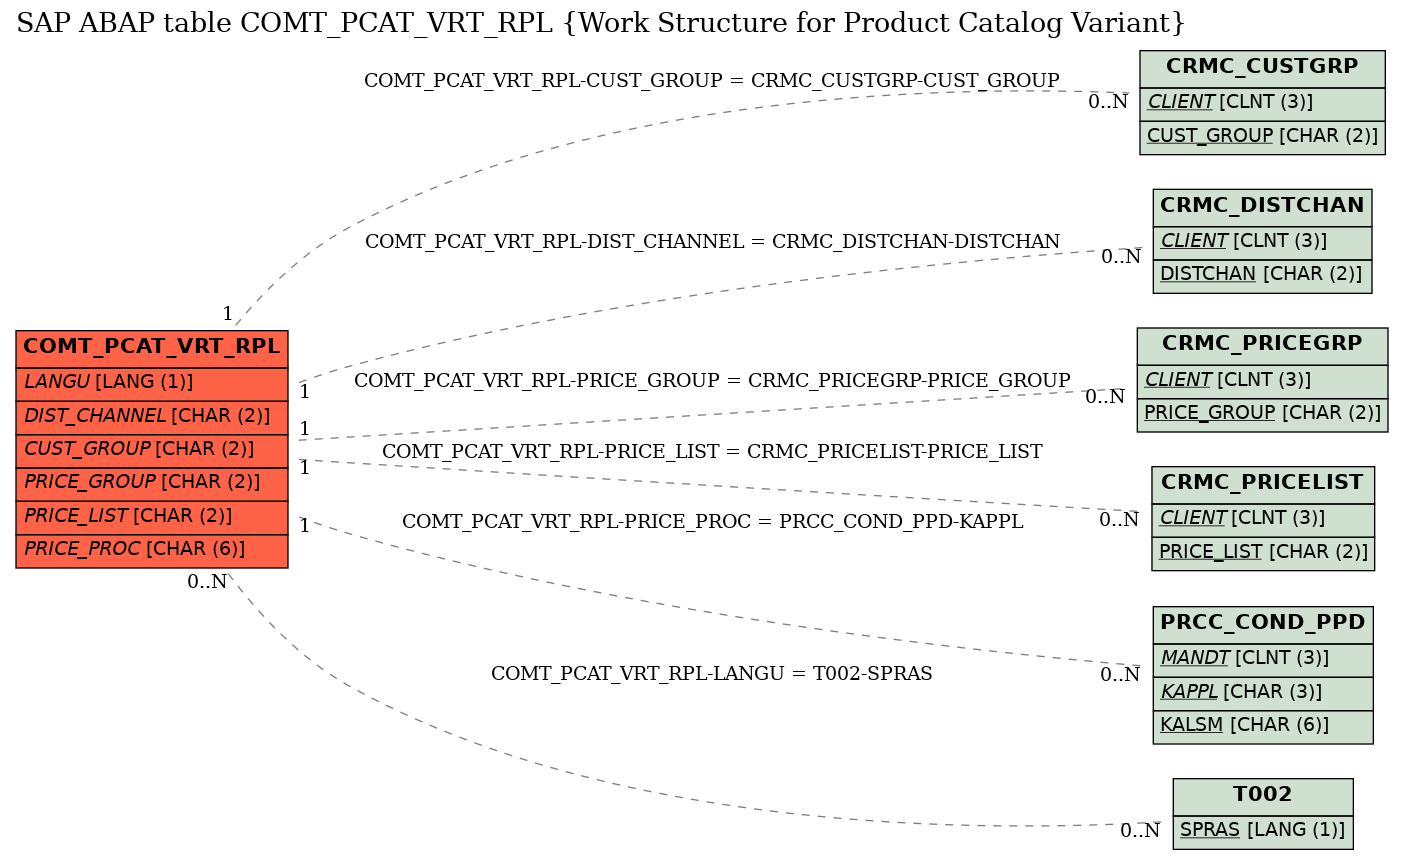 E-R Diagram for table COMT_PCAT_VRT_RPL (Work Structure for Product Catalog Variant)